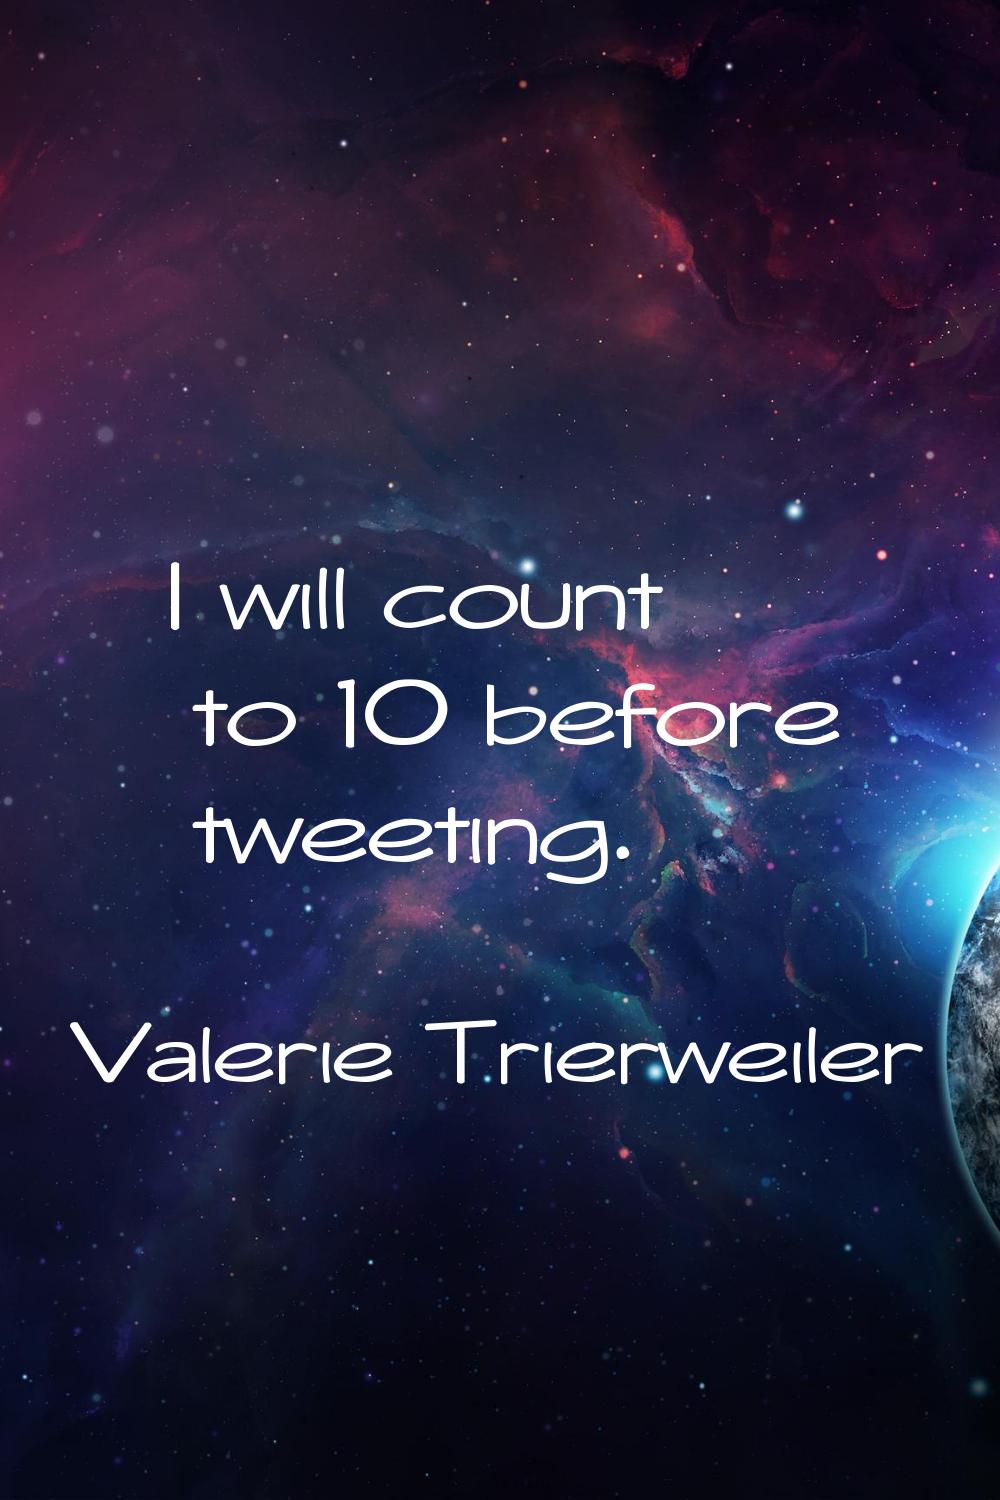 I will count to 10 before tweeting.